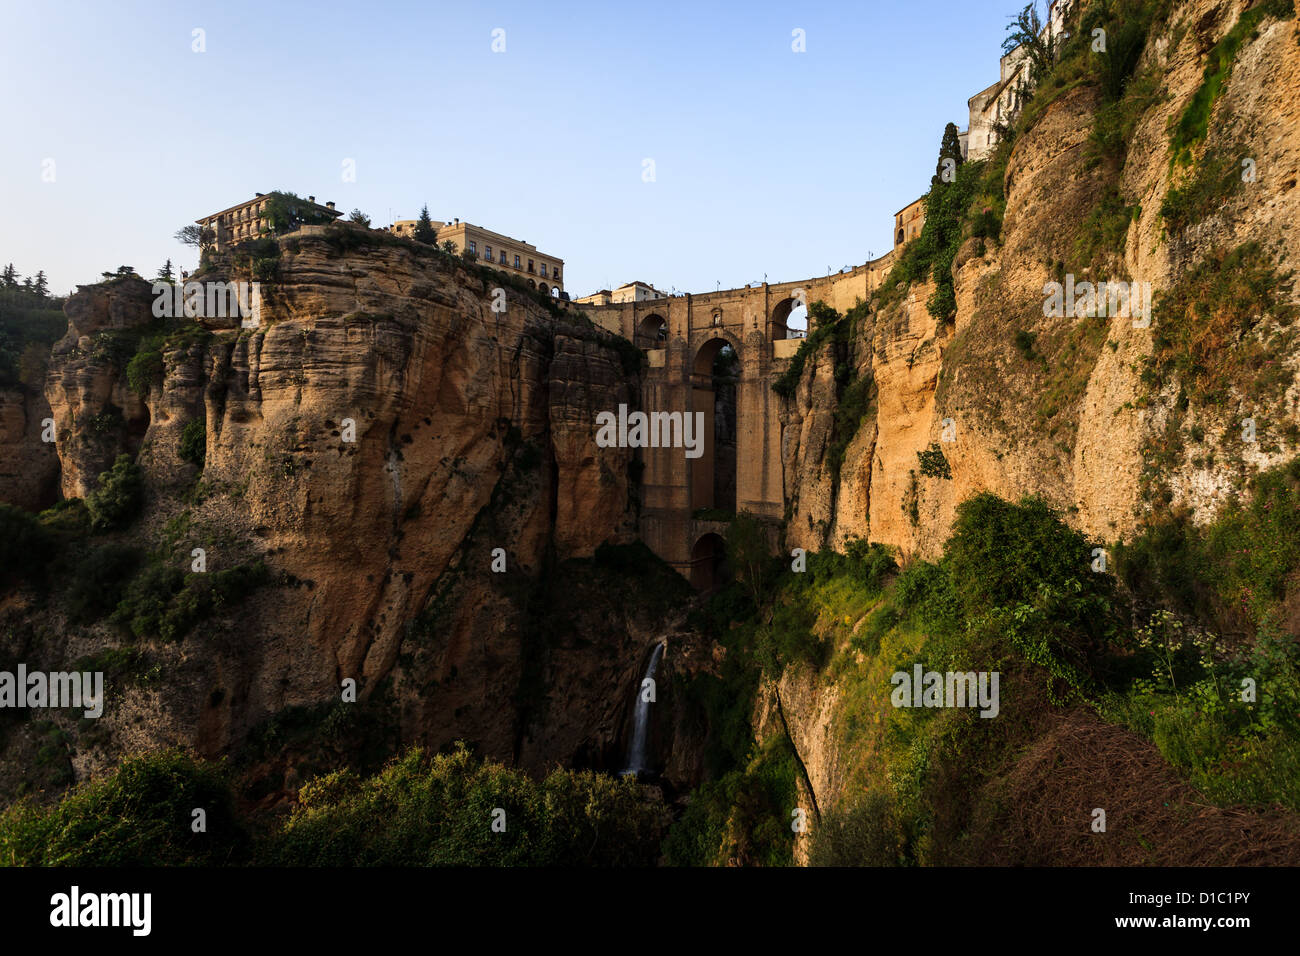 Both sides of Ronda, Spain connected by the ancient bridge spanning the Tajo Gorge Stock Photo